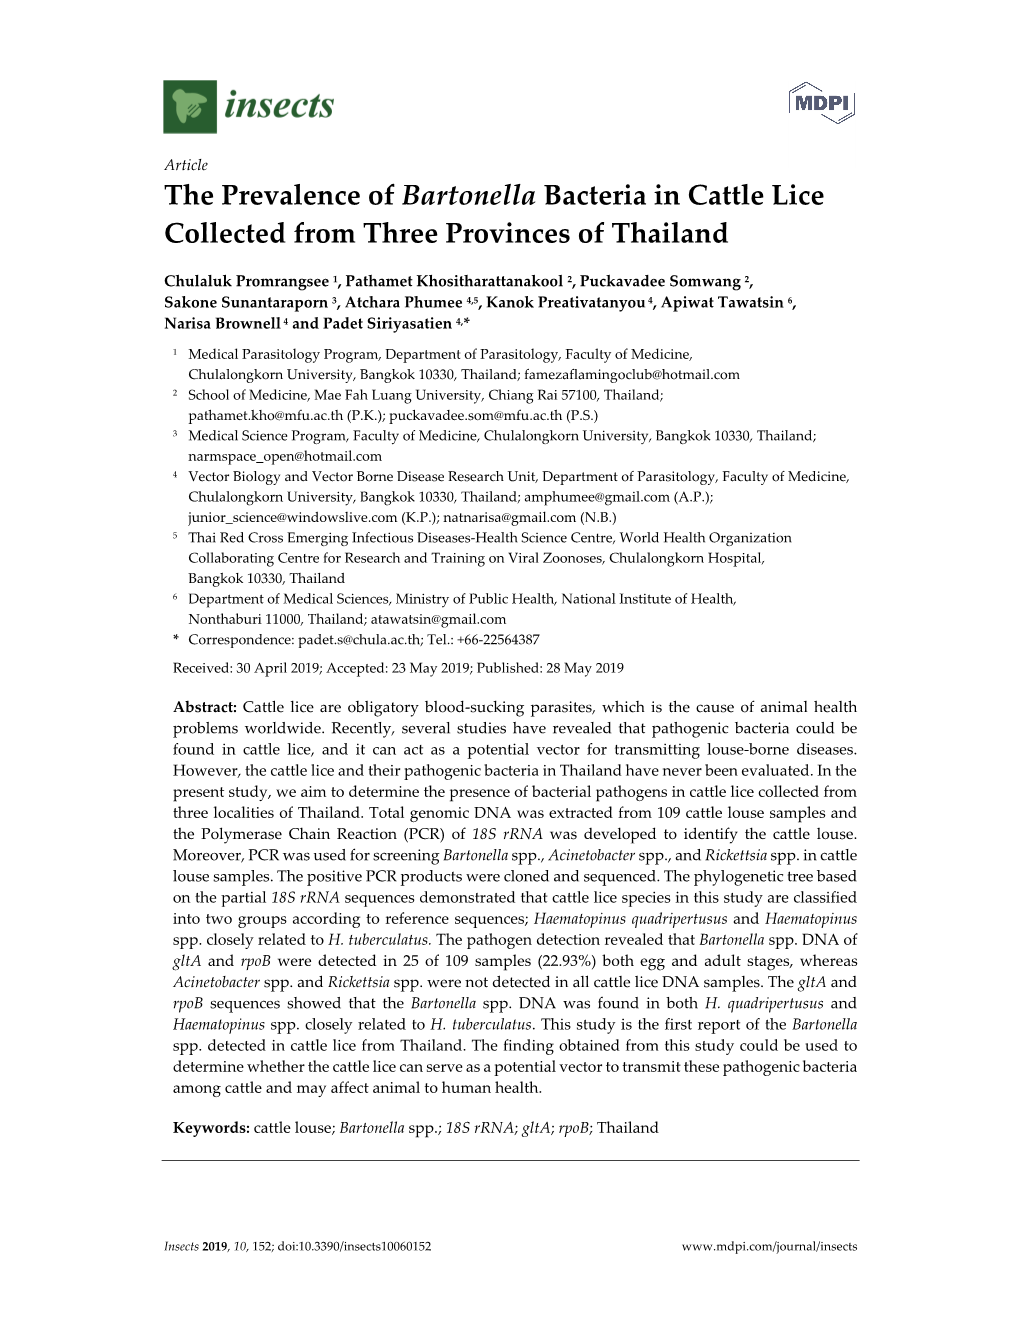 The Prevalence of Bartonella Bacteria in Cattle Lice Collected from Three Provinces of Thailand